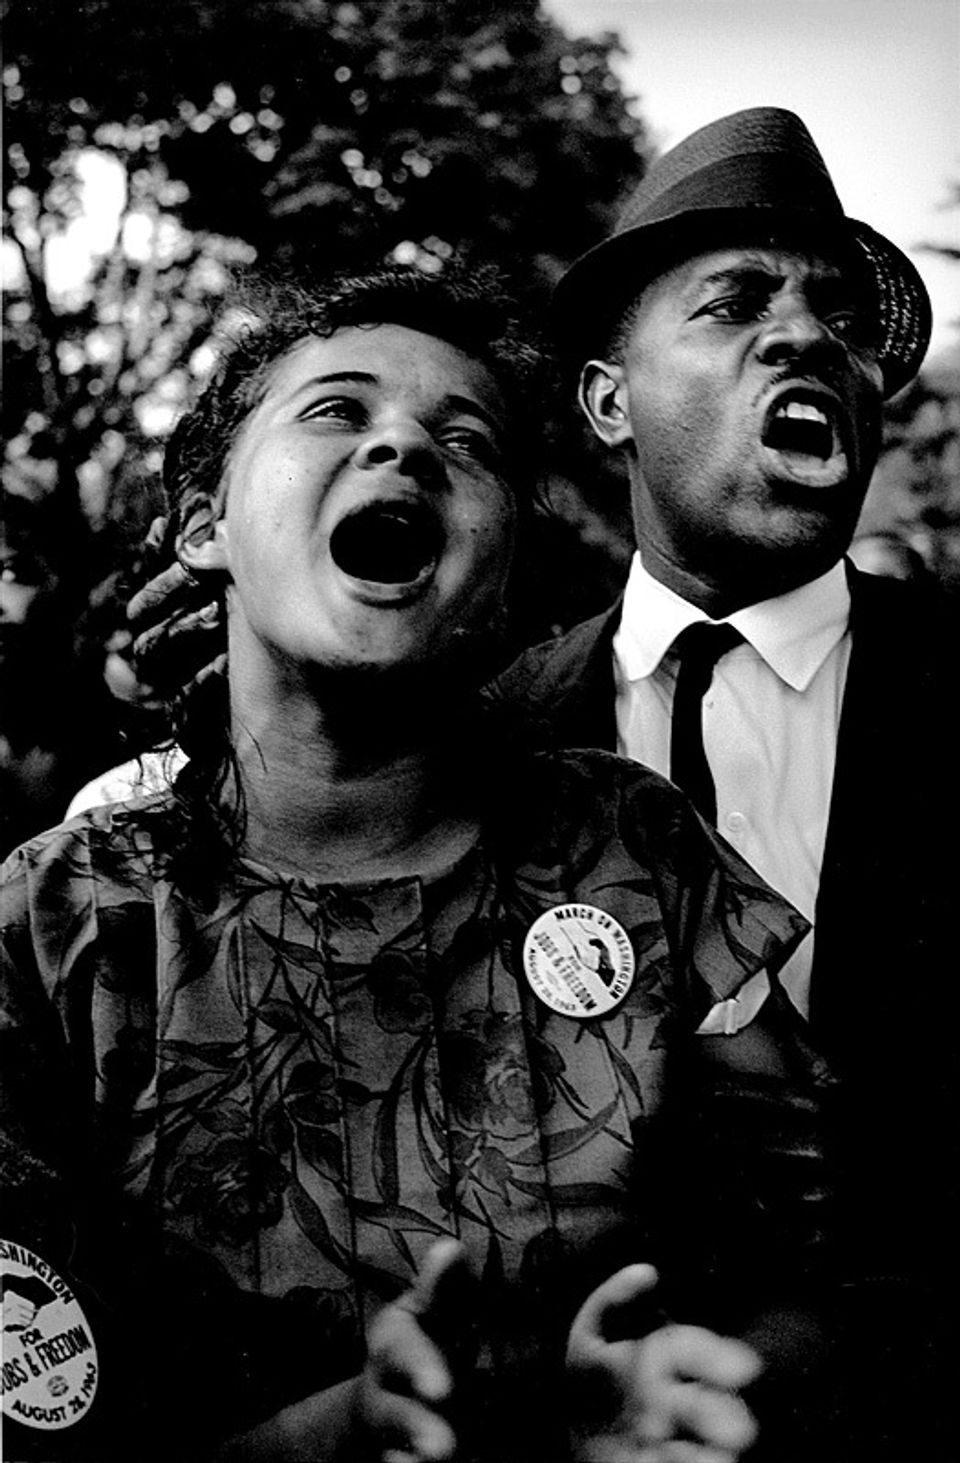 A photograph taken at the March on Washington of a woman and man yelling.